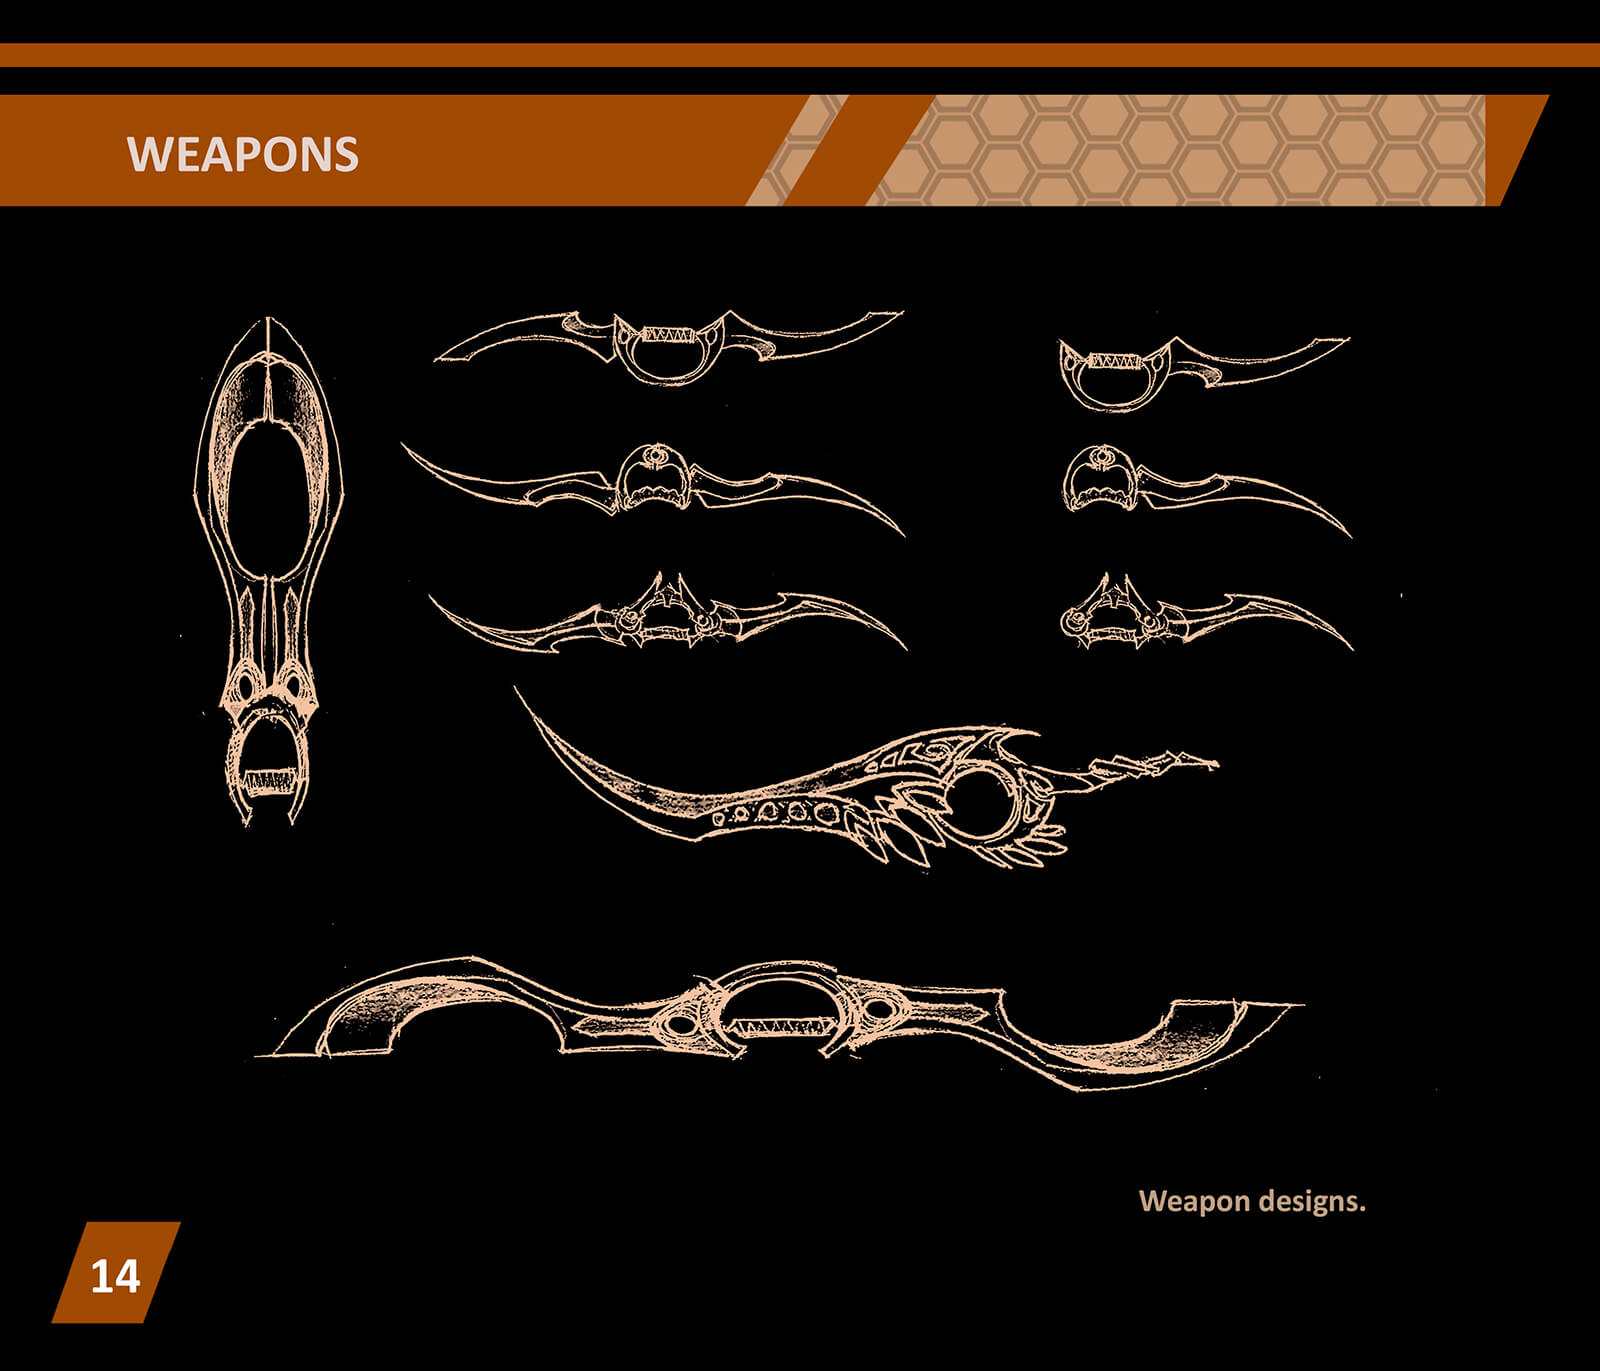 Black and white concept sketches of elaborate, curved swords and daggers